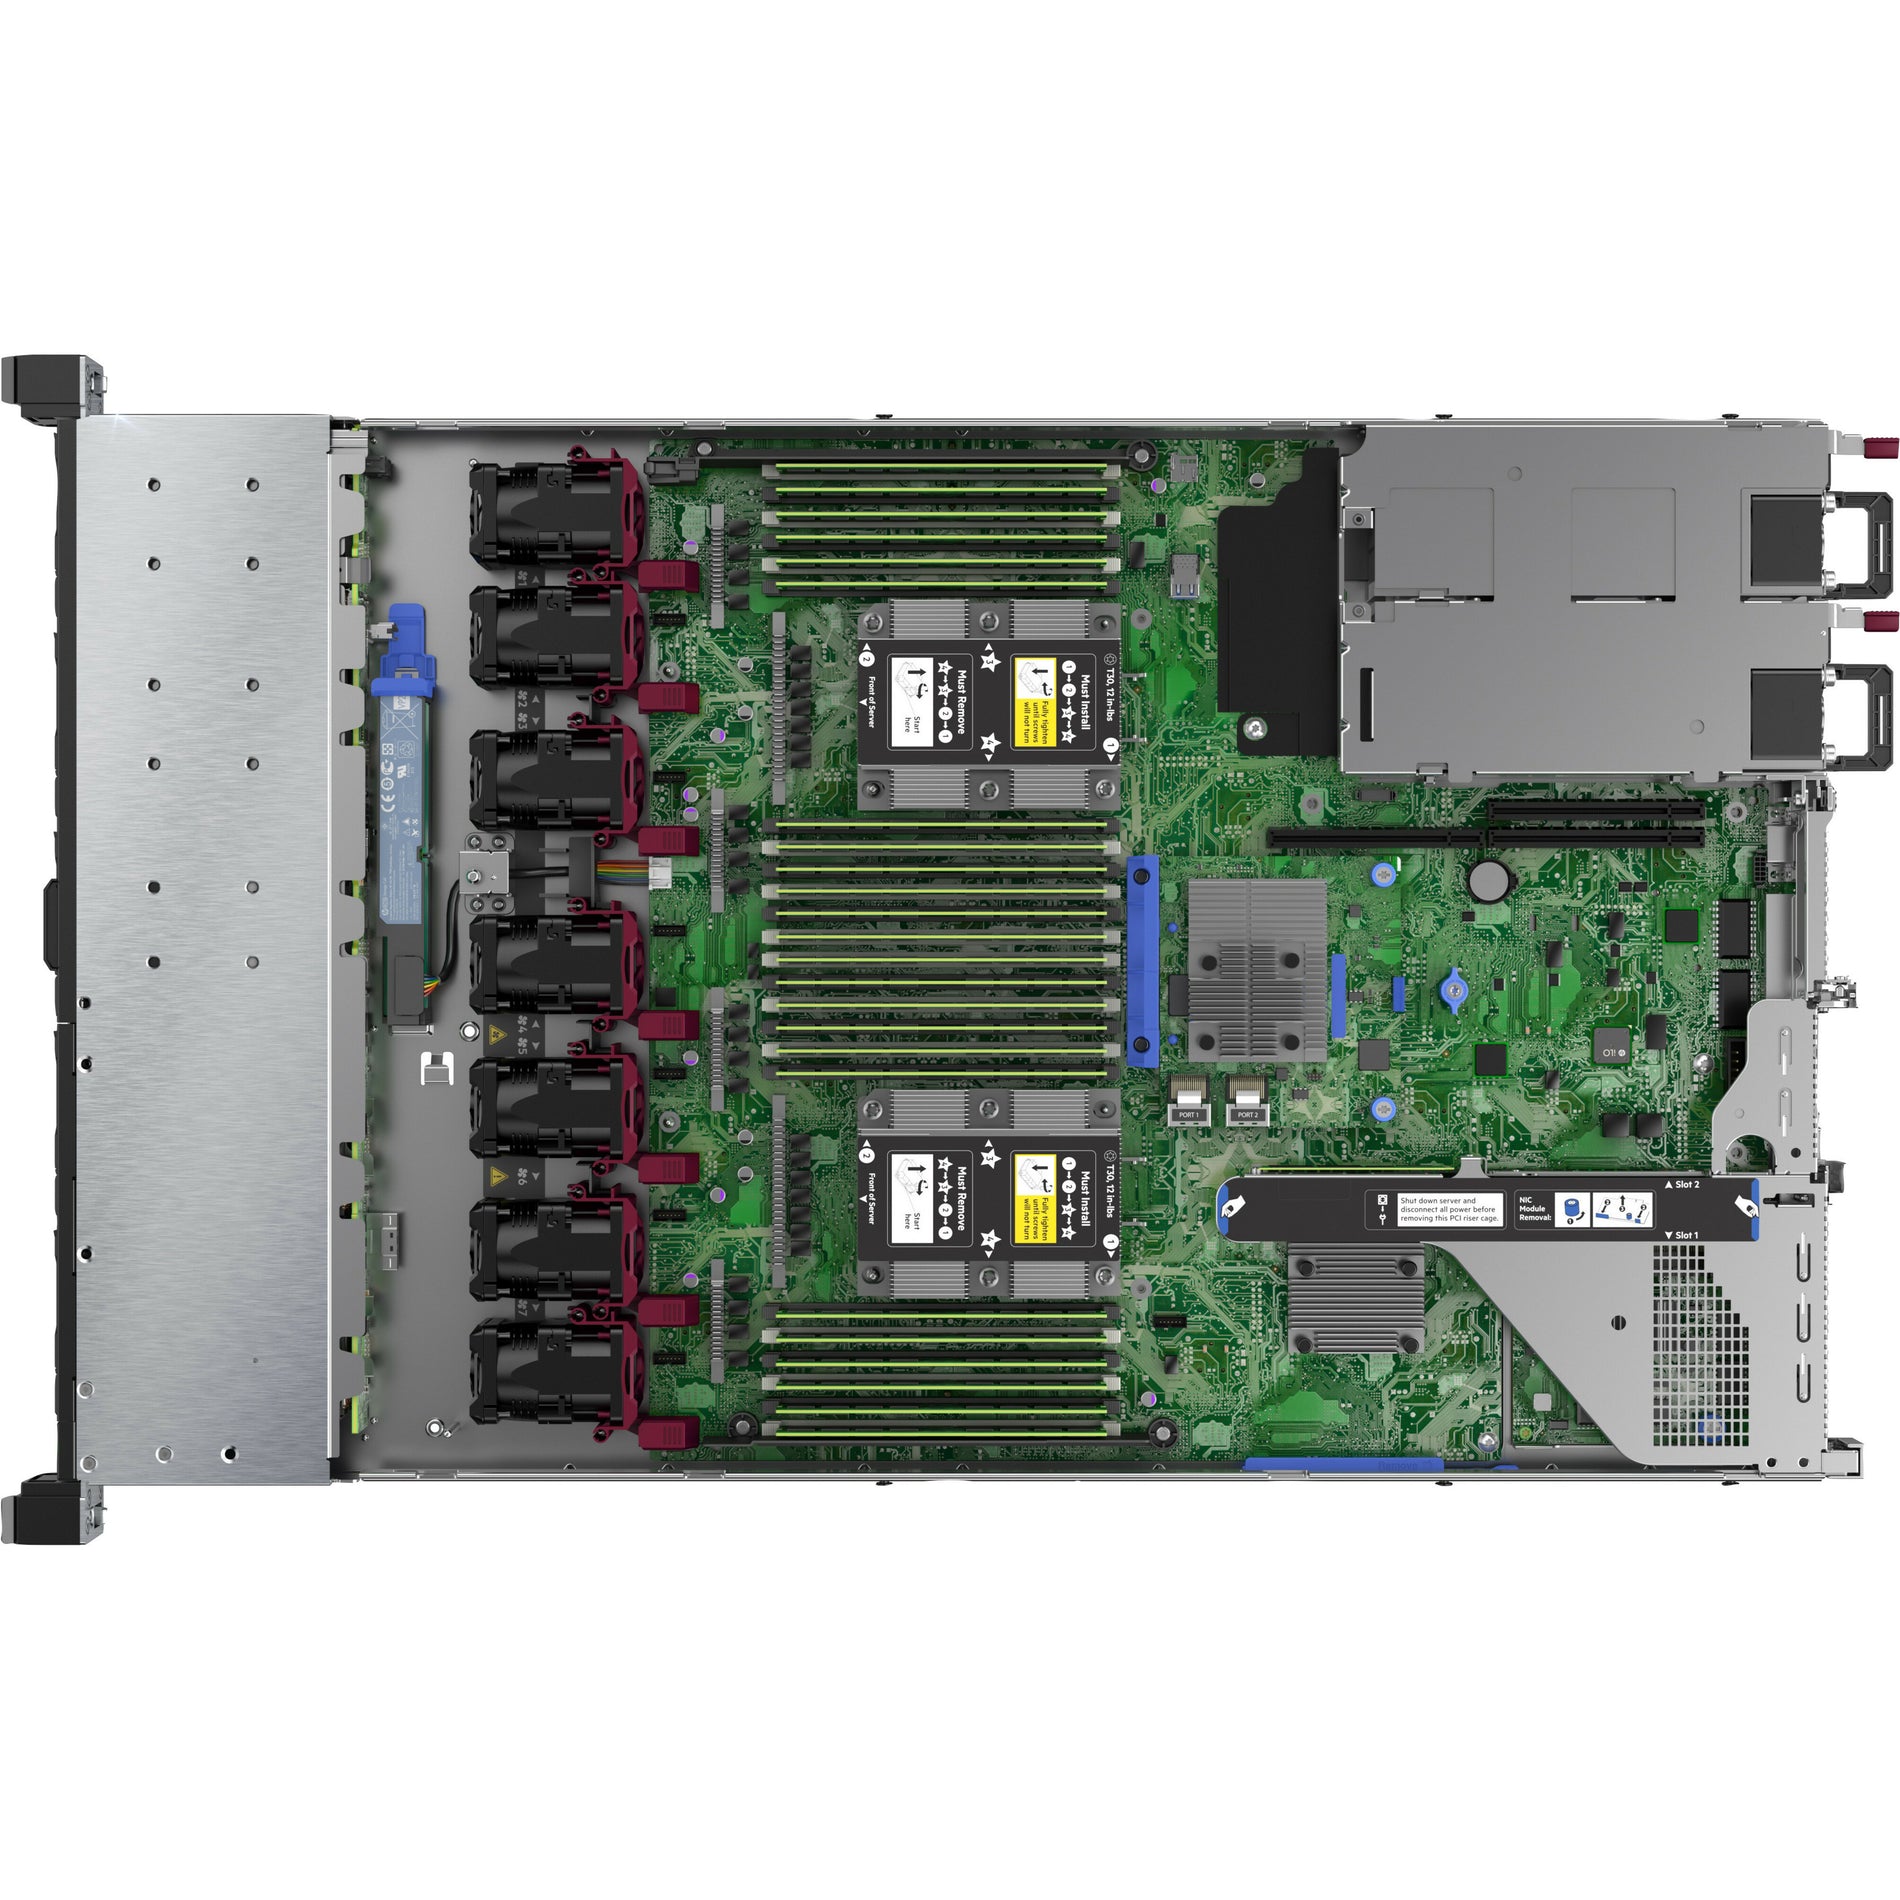 HPE P23579-B21 ProLiant DL360 Gen10 4214R 1P 32GB-R NC 8SFF 500W PS Server, Dodeca-core, 32GB RAM, 2.40 GHz, RAID Supported